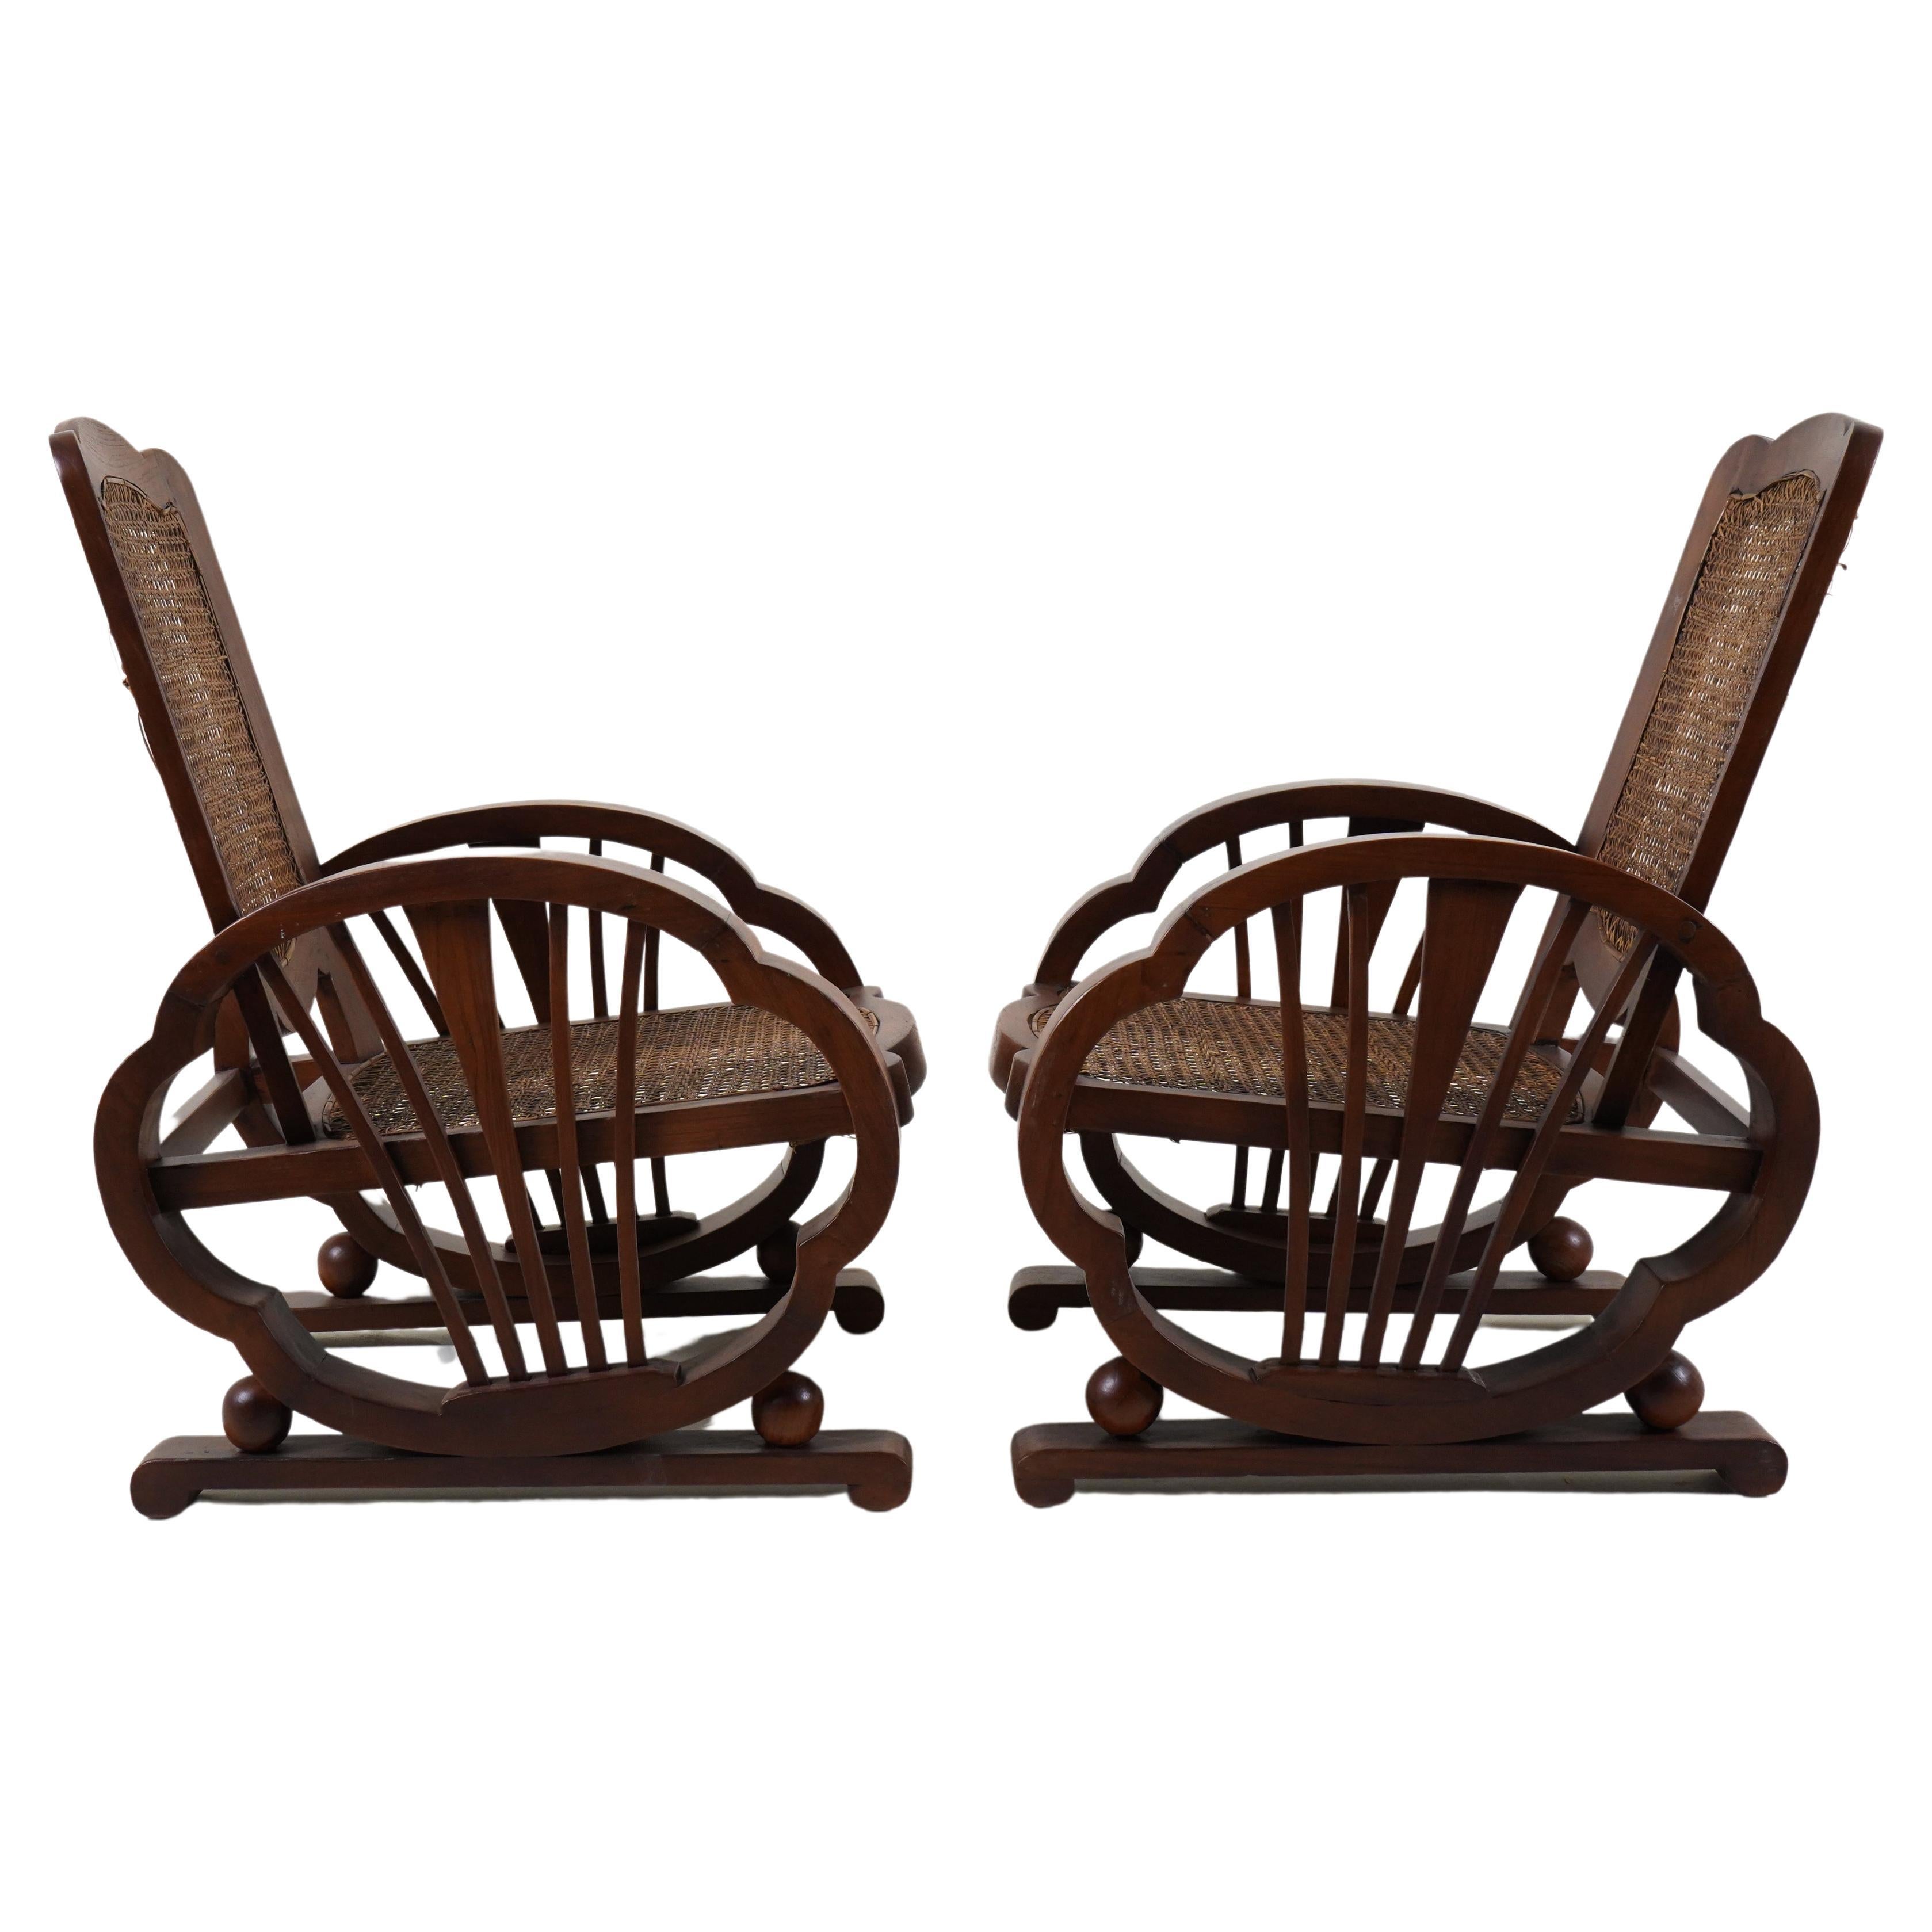 A Pair of Vintage Anglo-Indian Veranda Chairs in Teak and Rattan For Sale